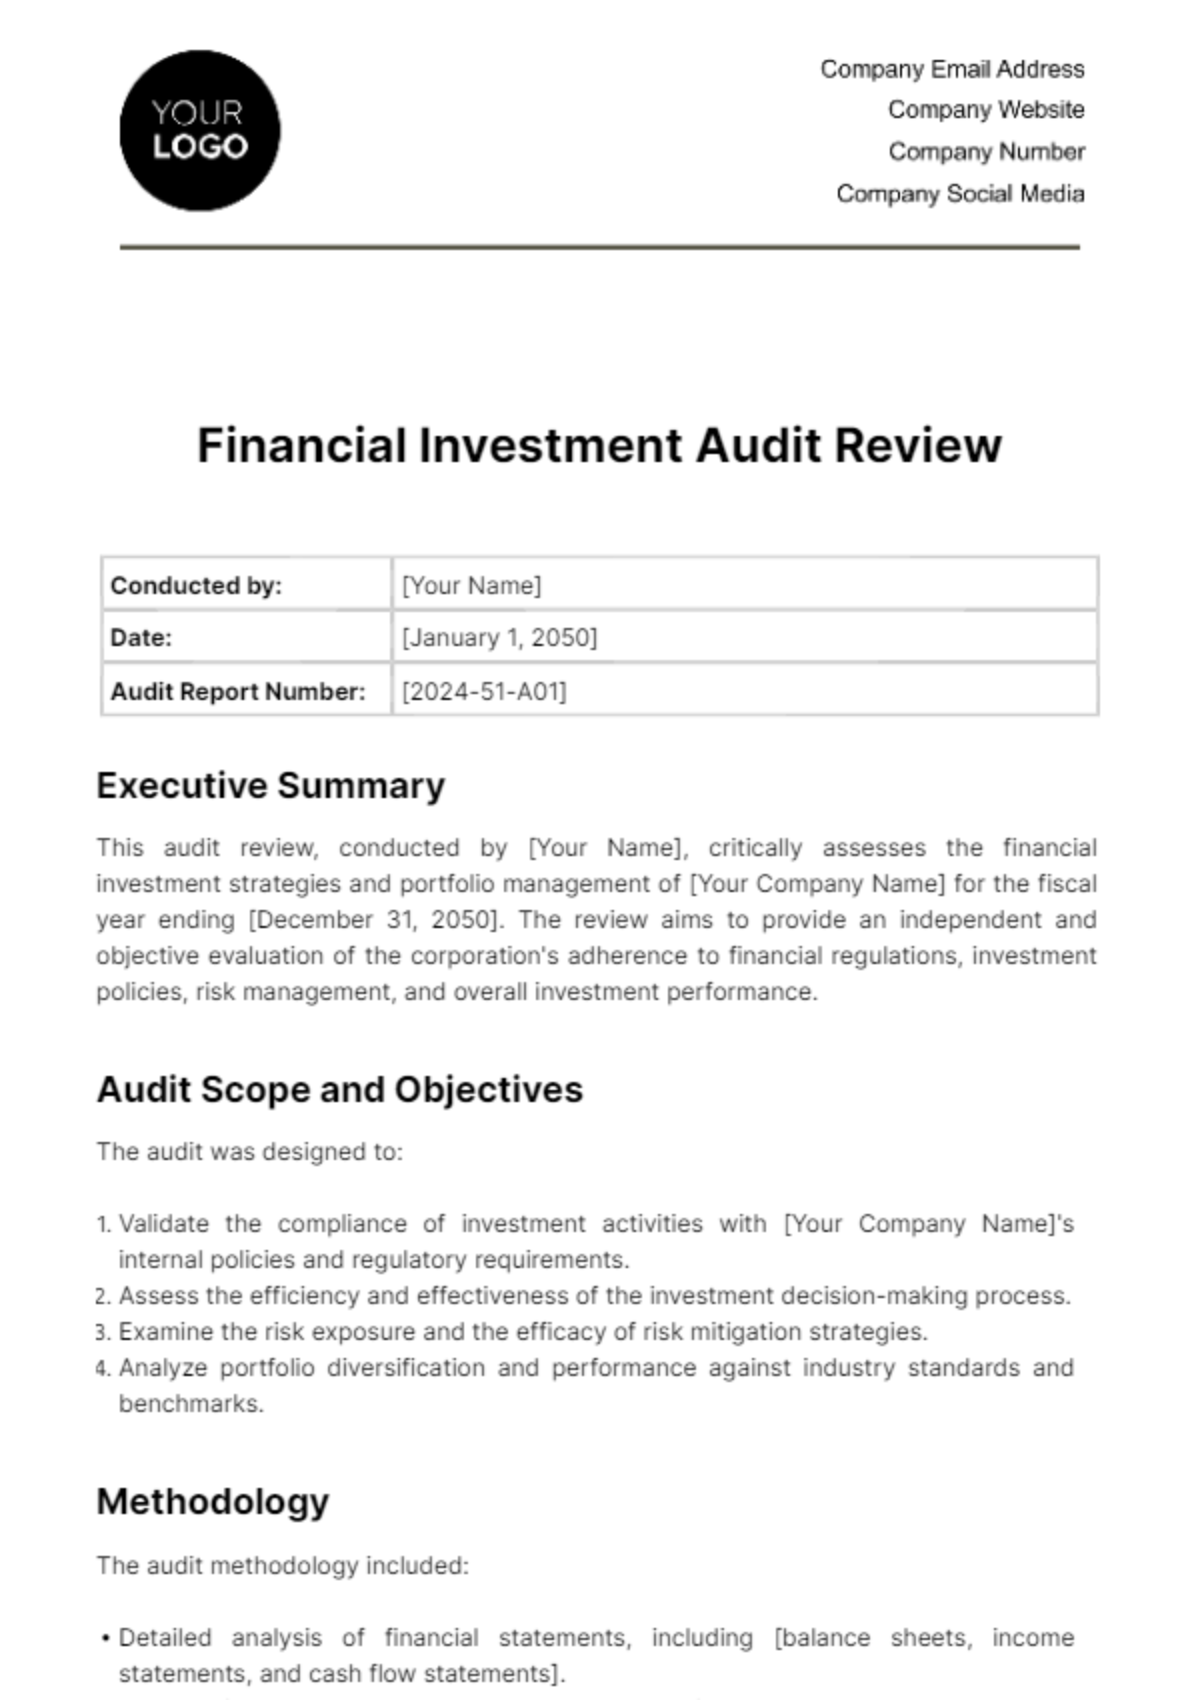 Financial Investment Audit Review Template